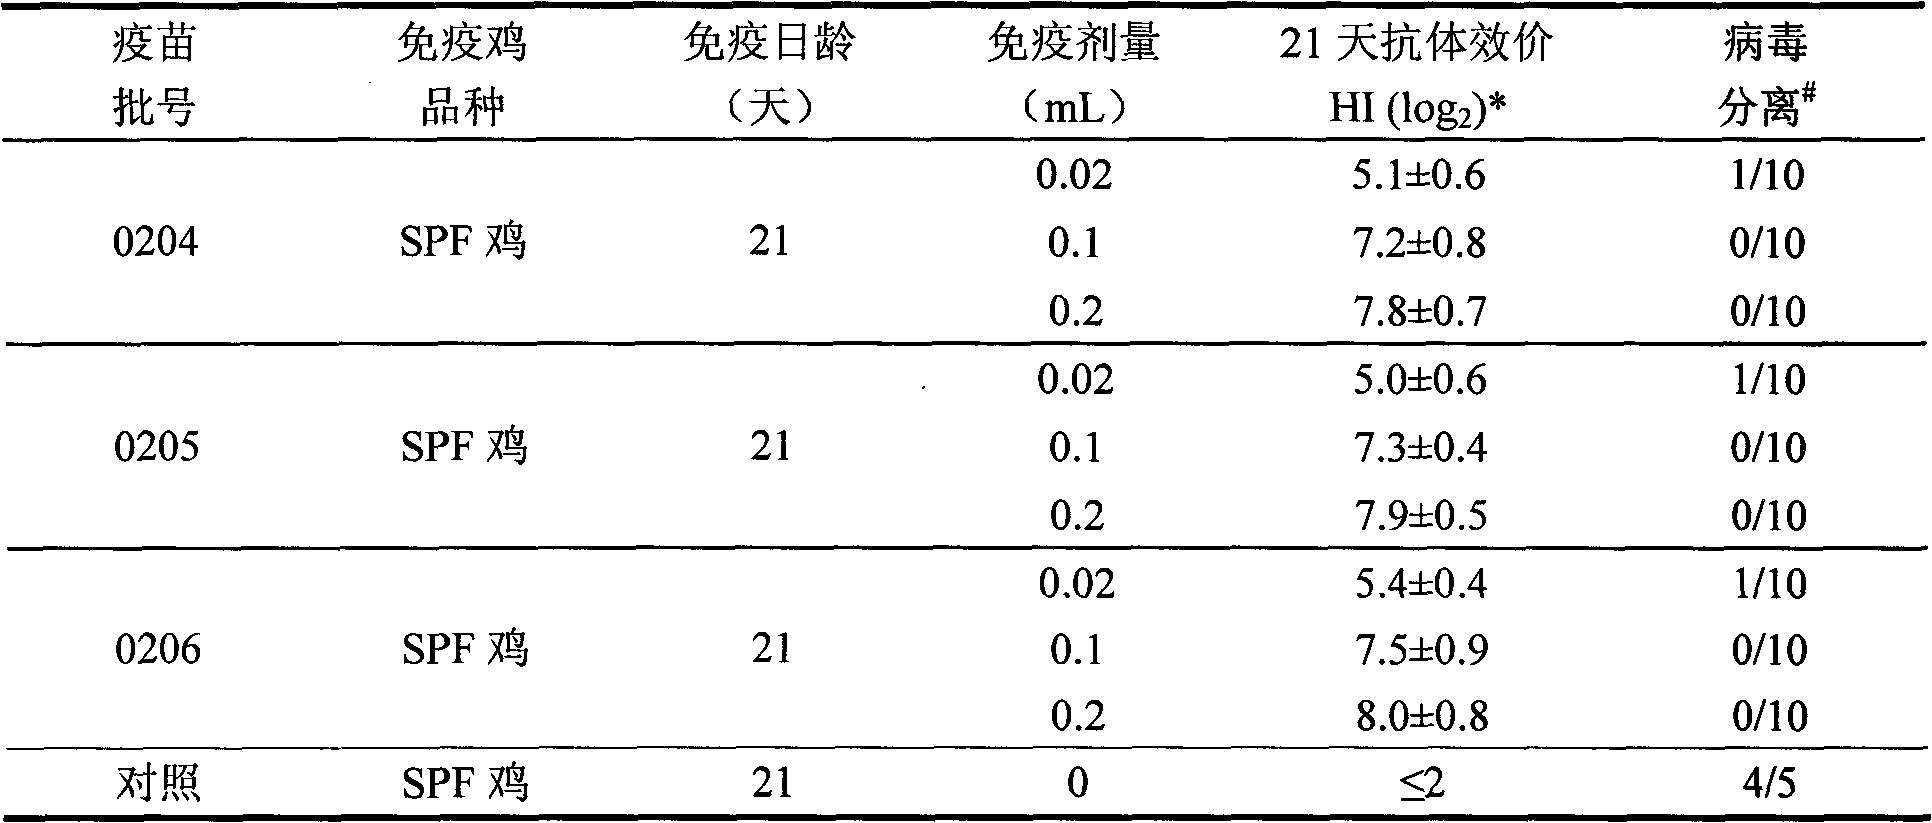 Preparation method and product of H9N2 subtype avian influenza inactivated vaccine